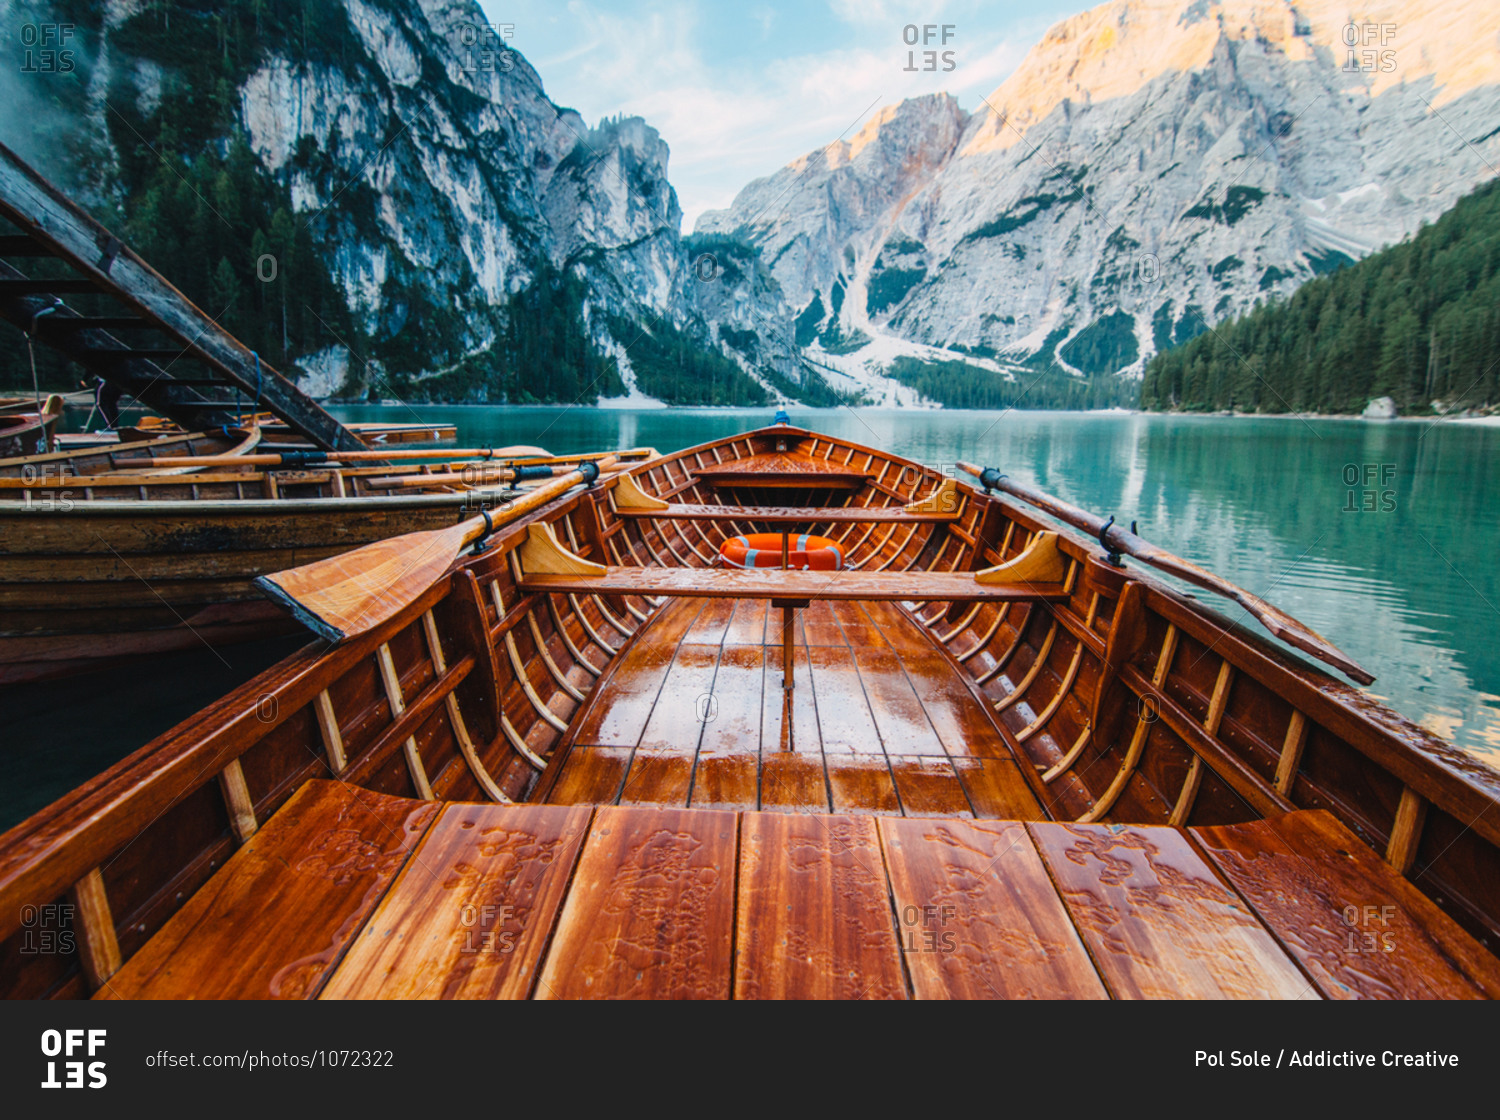 Wooden boat with paddles floating on turquoise water of calm lake on background of majestic landscape of highlands